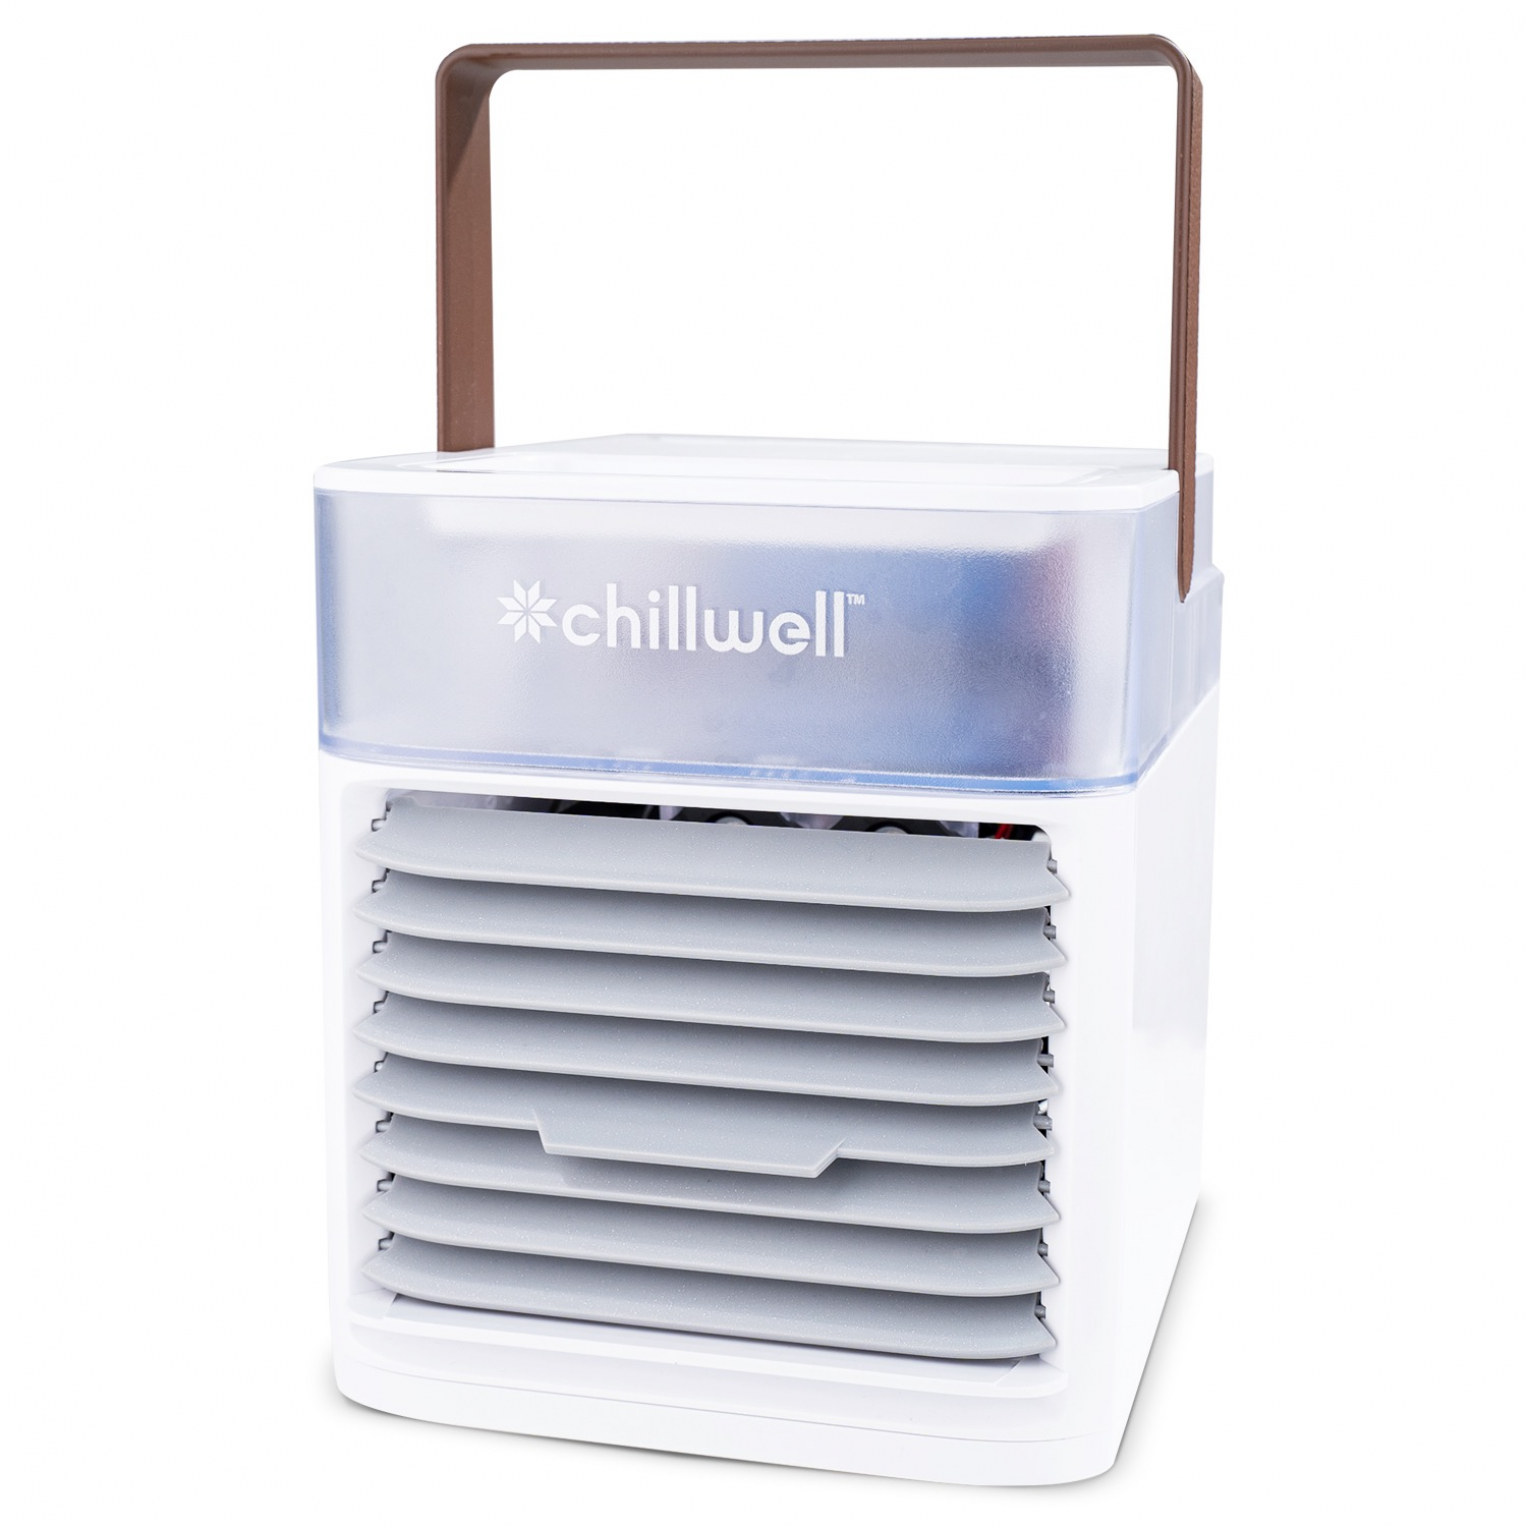 Chillwell AC Systems